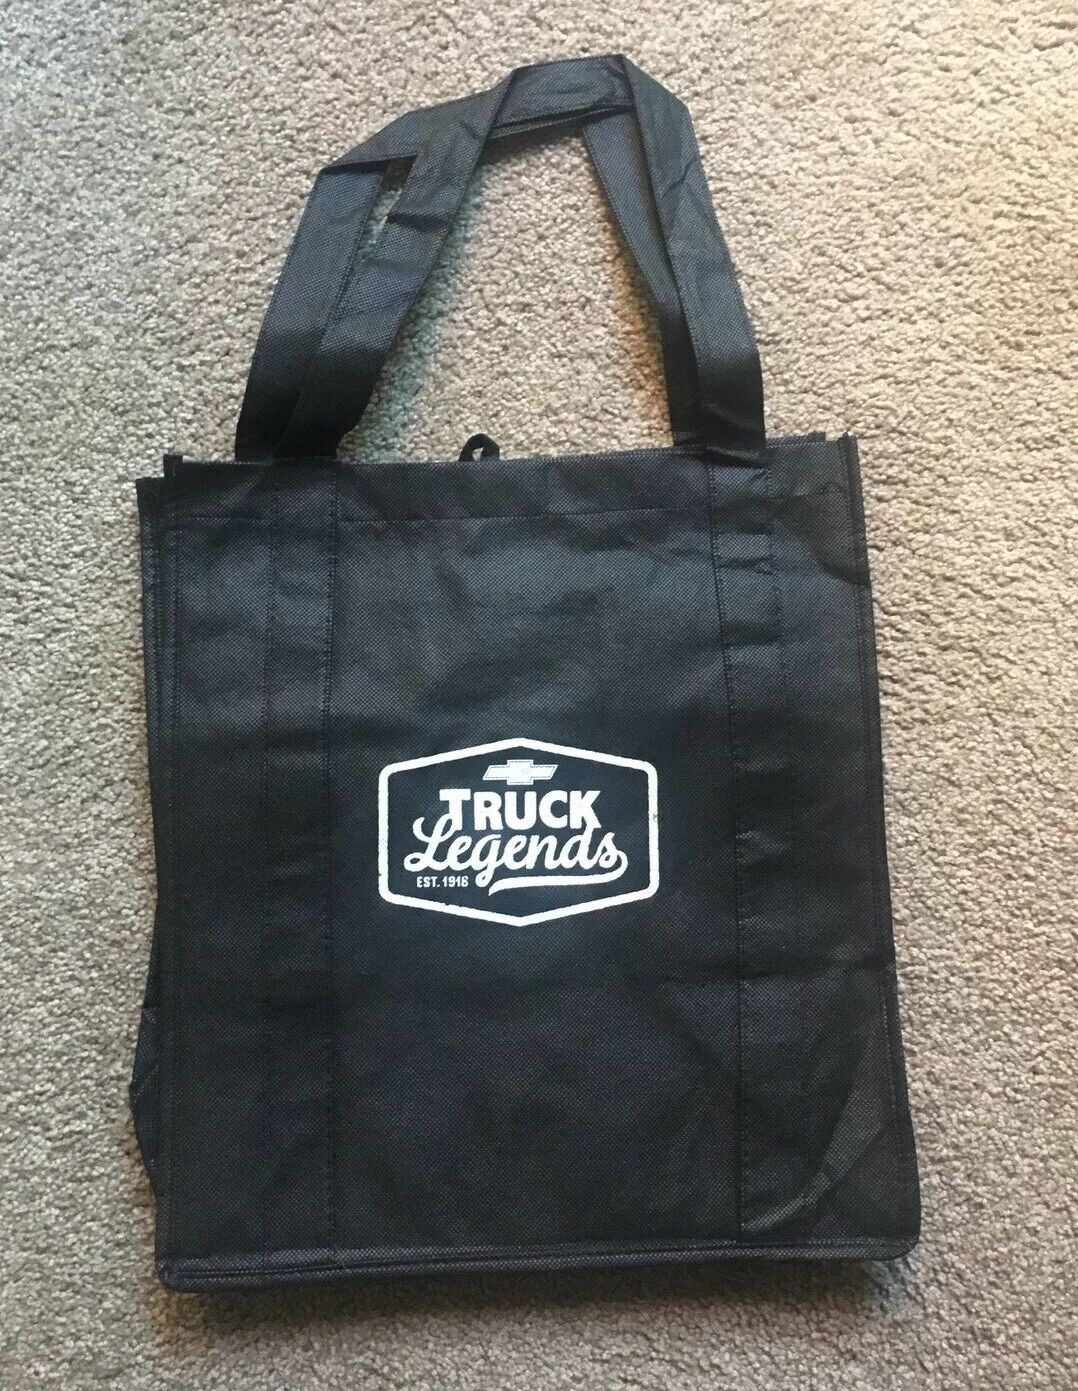 Recycle Bag W/ Chevy Truck Legends Logo - Collector’s Item - Black - New